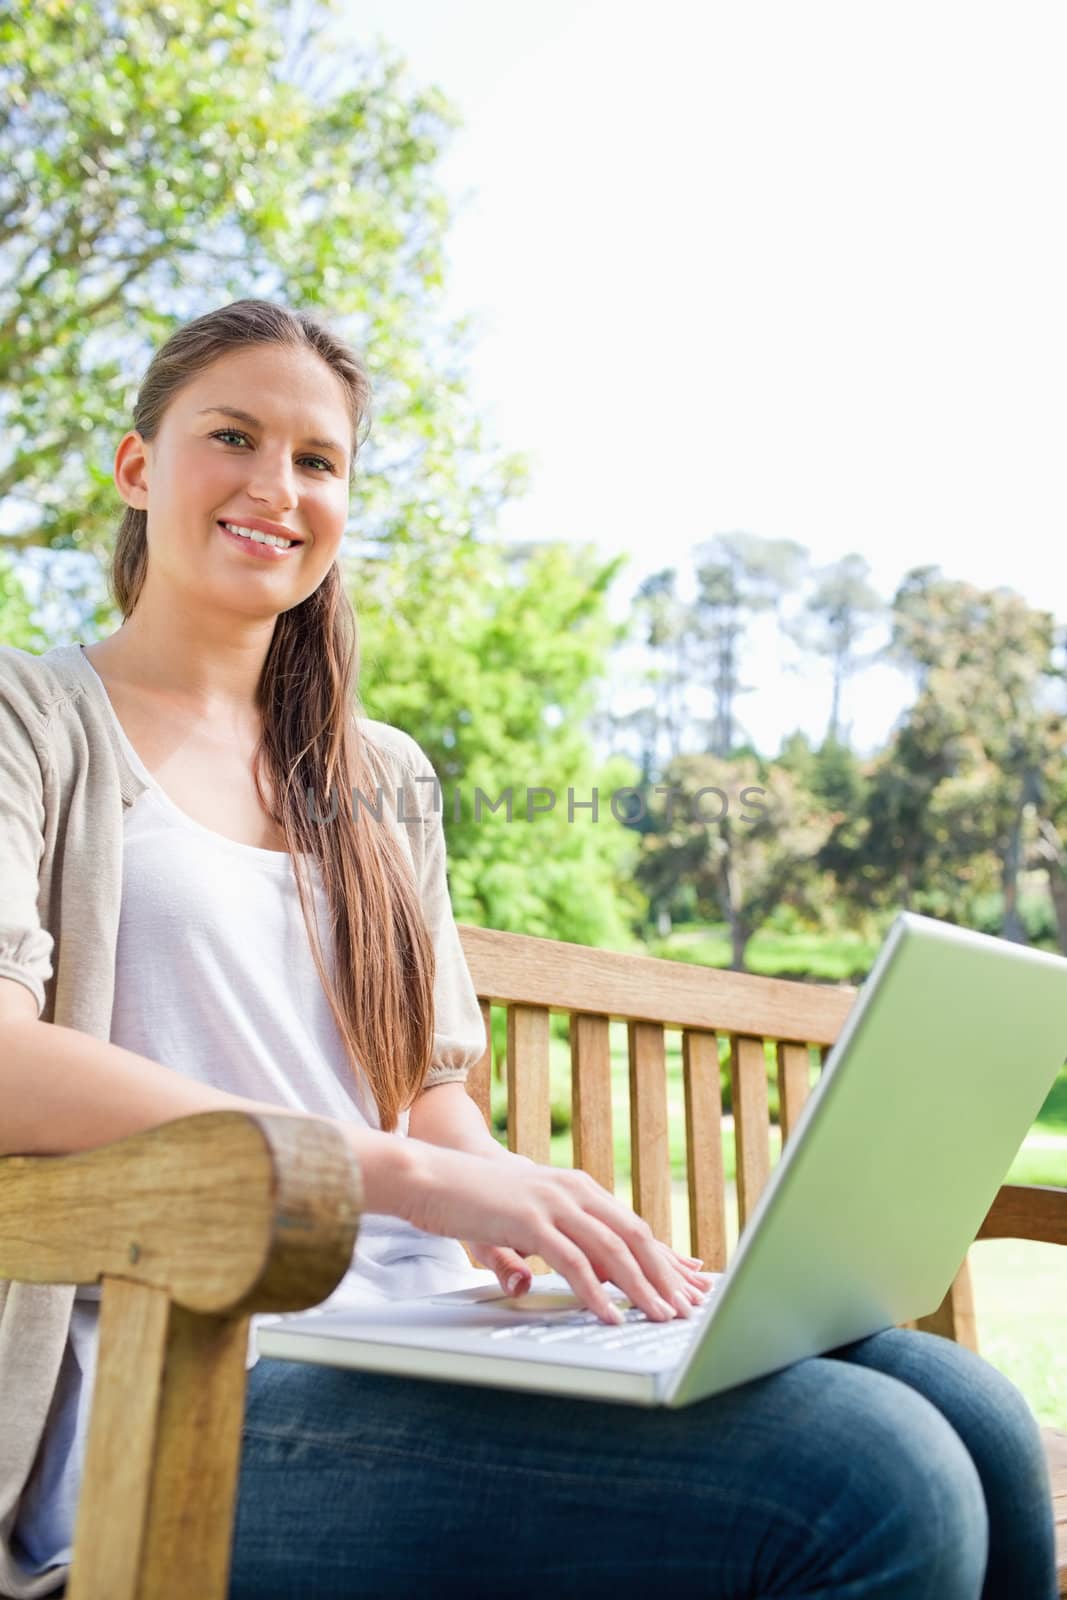 Smiling young woman with her notebook sitting on a park bench